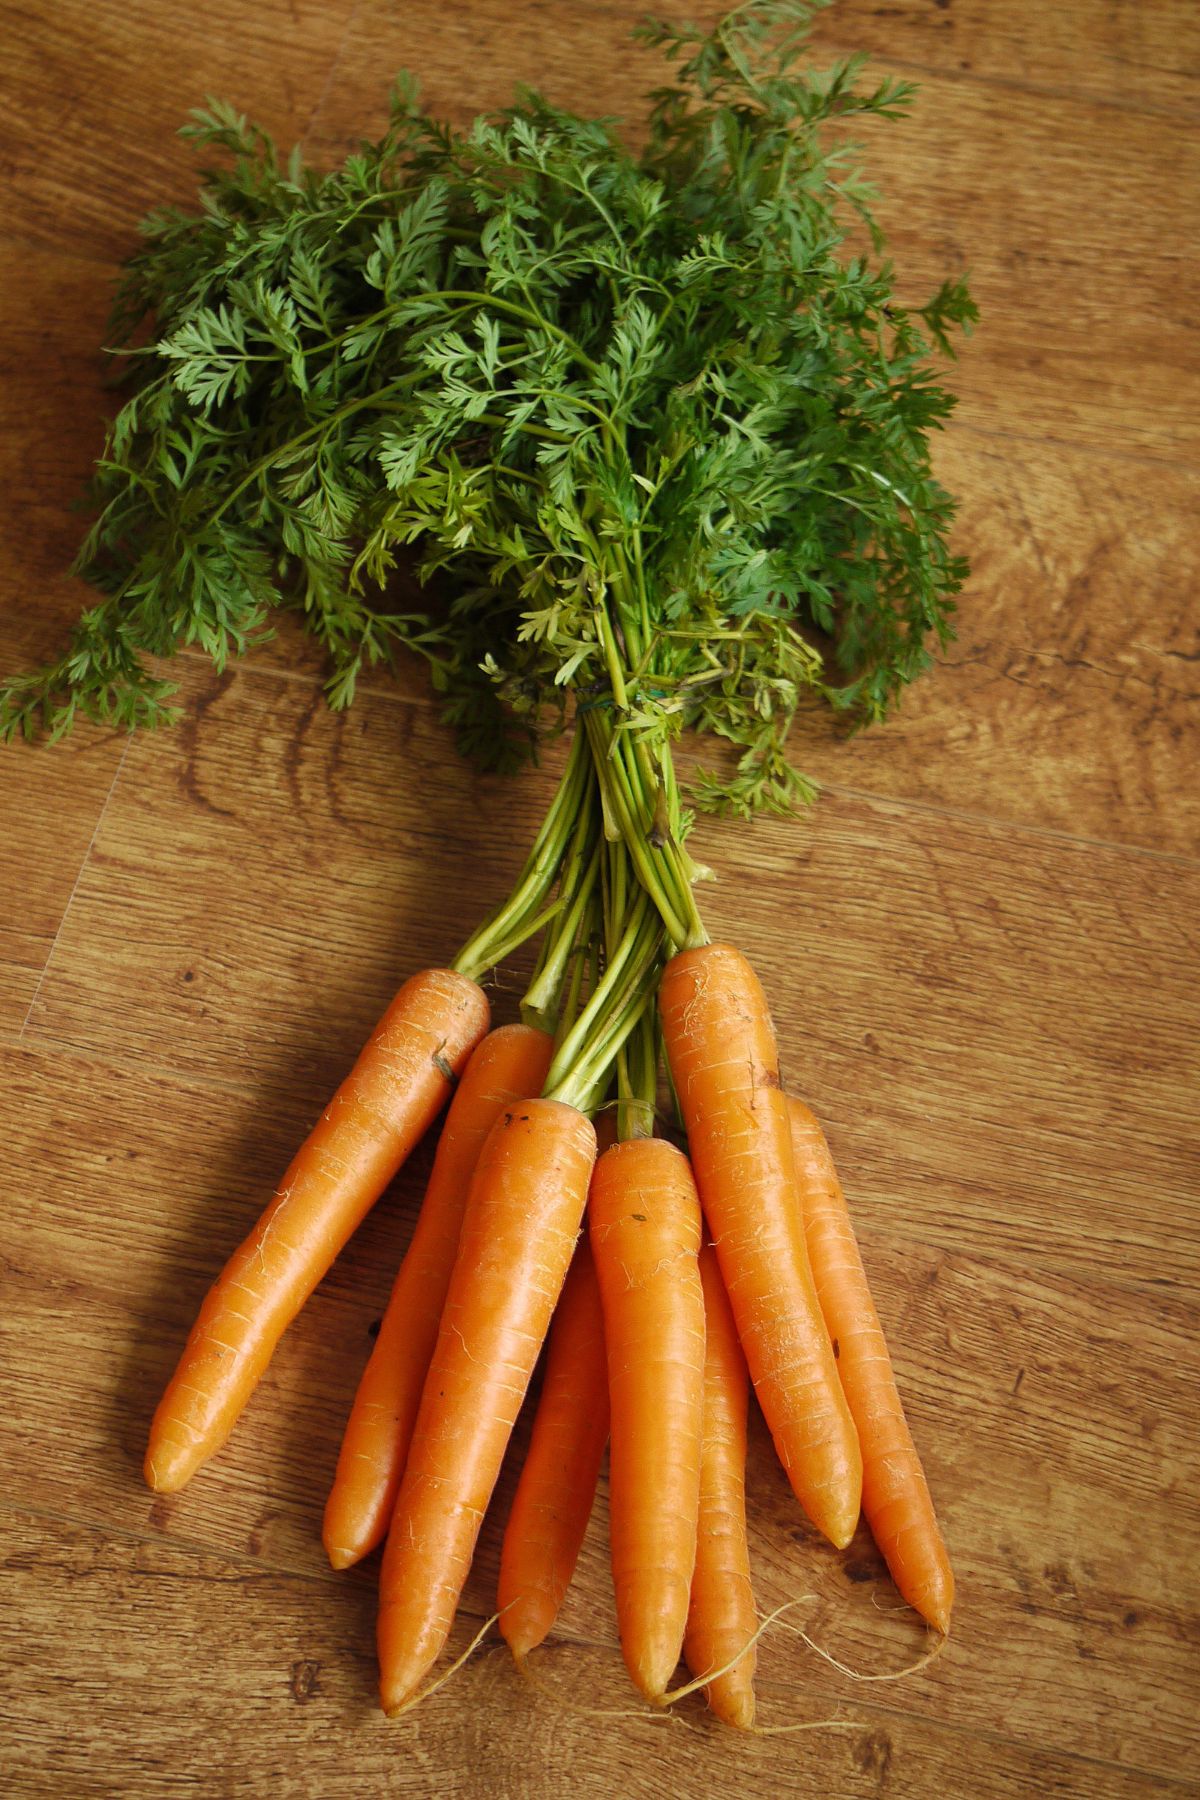 A bunch of small carrots with greens on a wooden table.